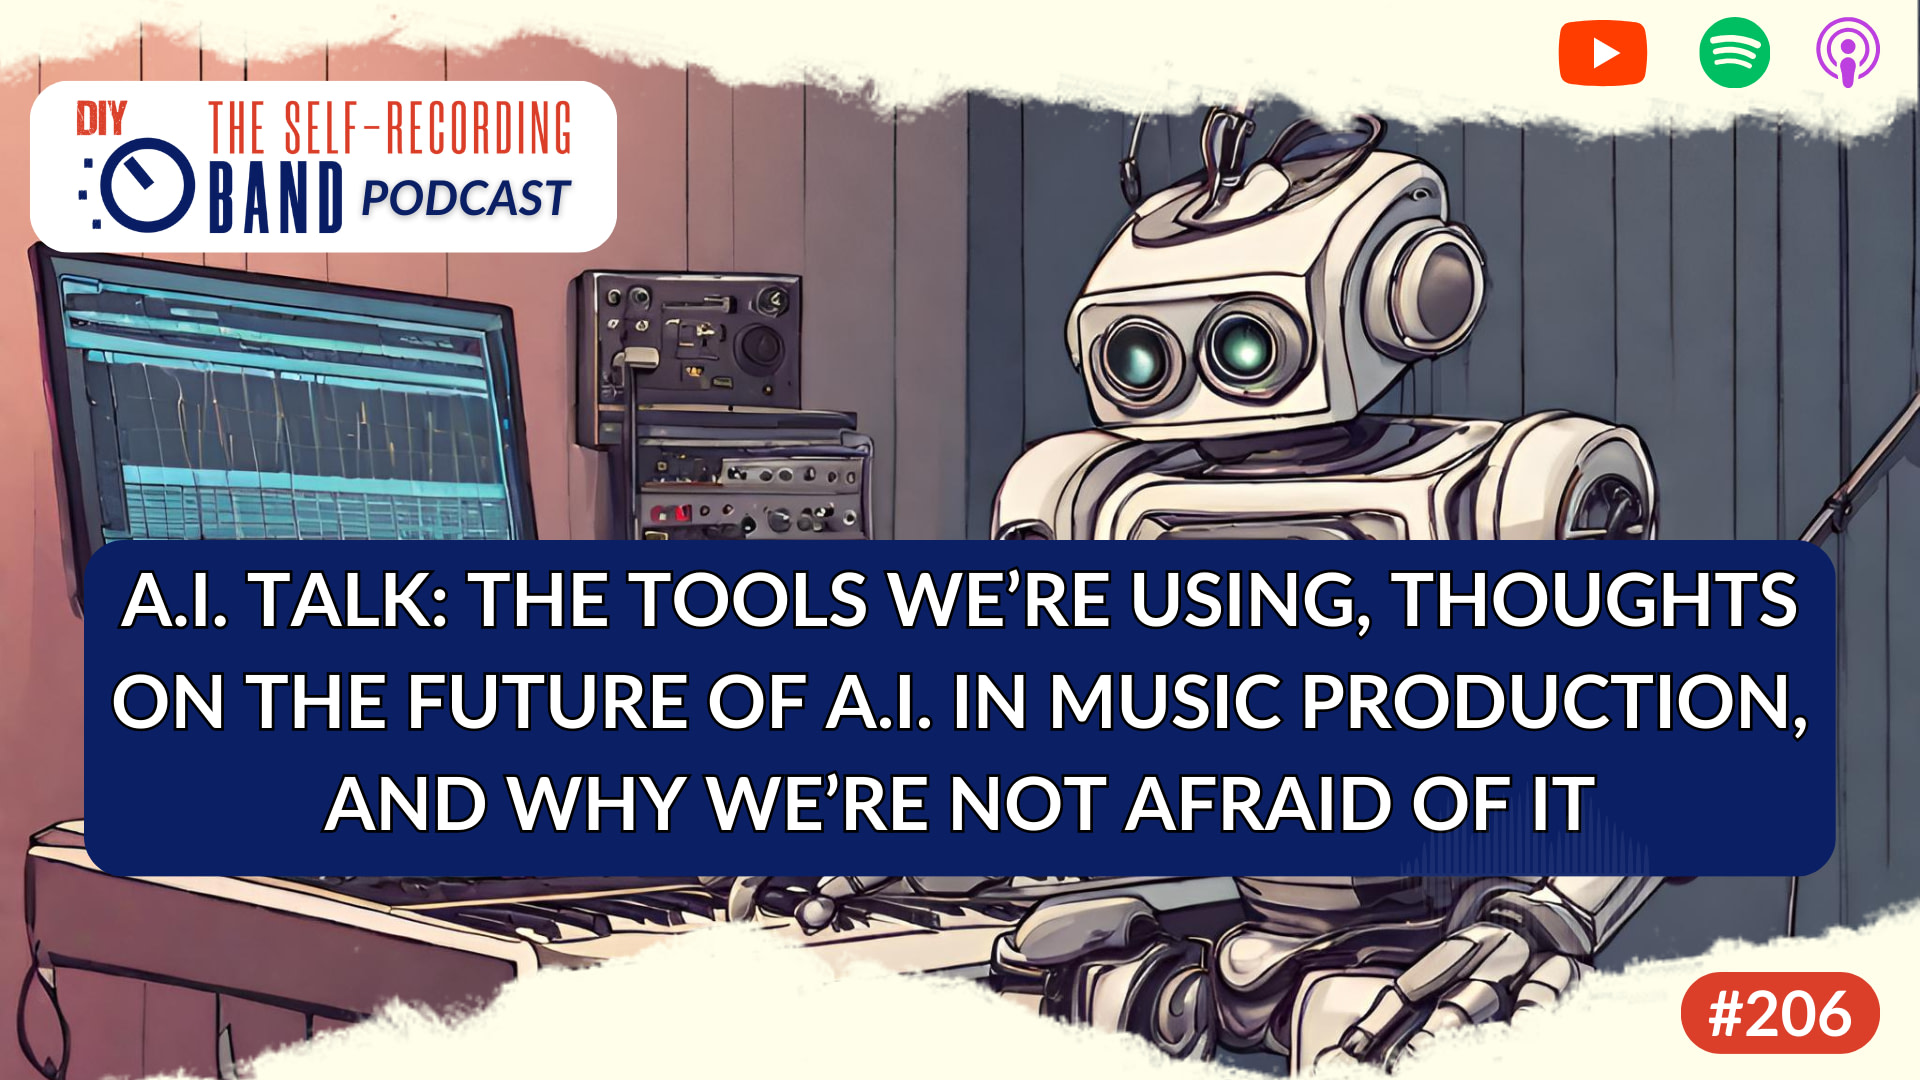 A.I. Talk: The Tools We're Using, Thoughts On The Future Of A.I. In Music Production, And Why We're Not Afraid Of It